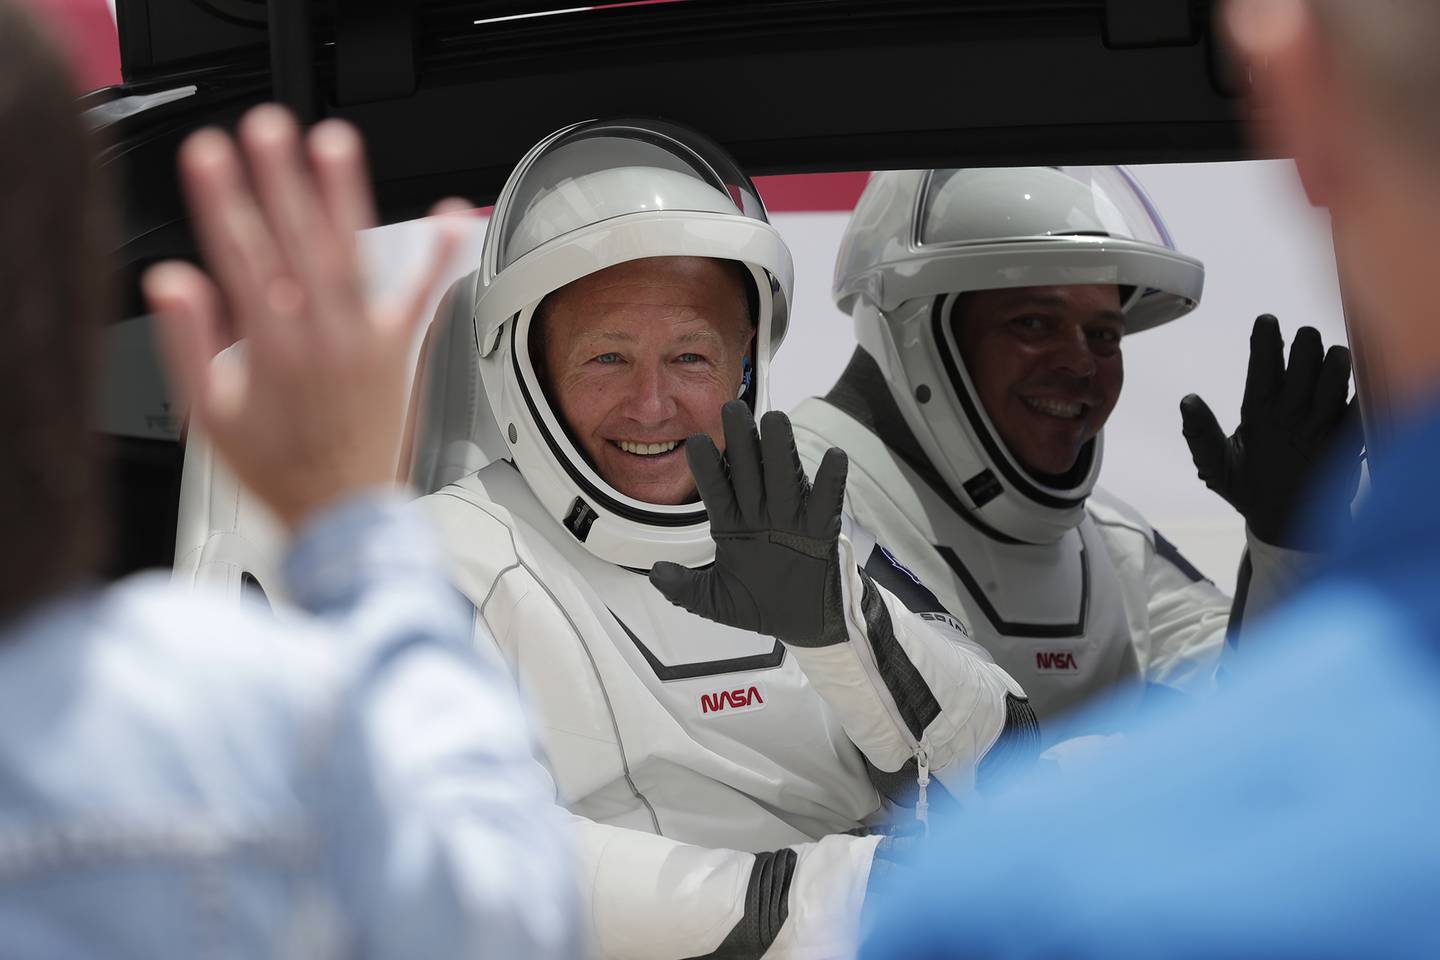 NASA astronauts Douglas Hurley, left, and Robert Behnken ride a Tesla SUV from the Neil A. Armstrong Operations and Checkout Building on their way to Pad 39-A, at the Kennedy Space Center in Cape Canaveral, Fla., Wednesday, May 27, 2020.